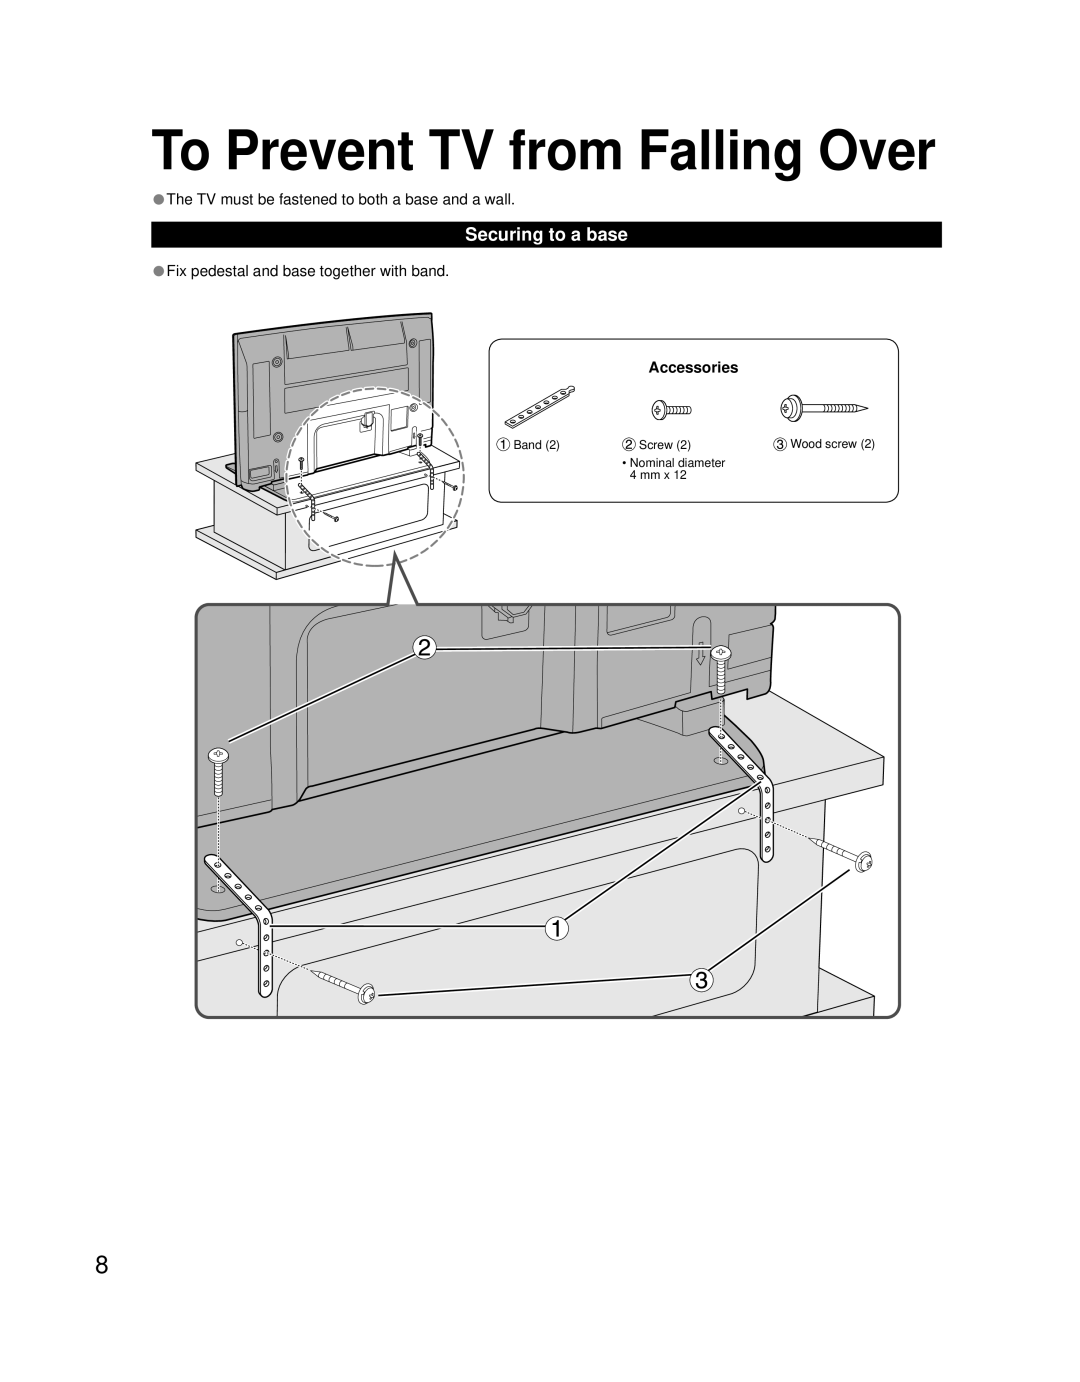 Panasonic TQB2AA0756 quick start To Prevent TV from Falling Over, Securing to a base, Accessories, Wood screw 